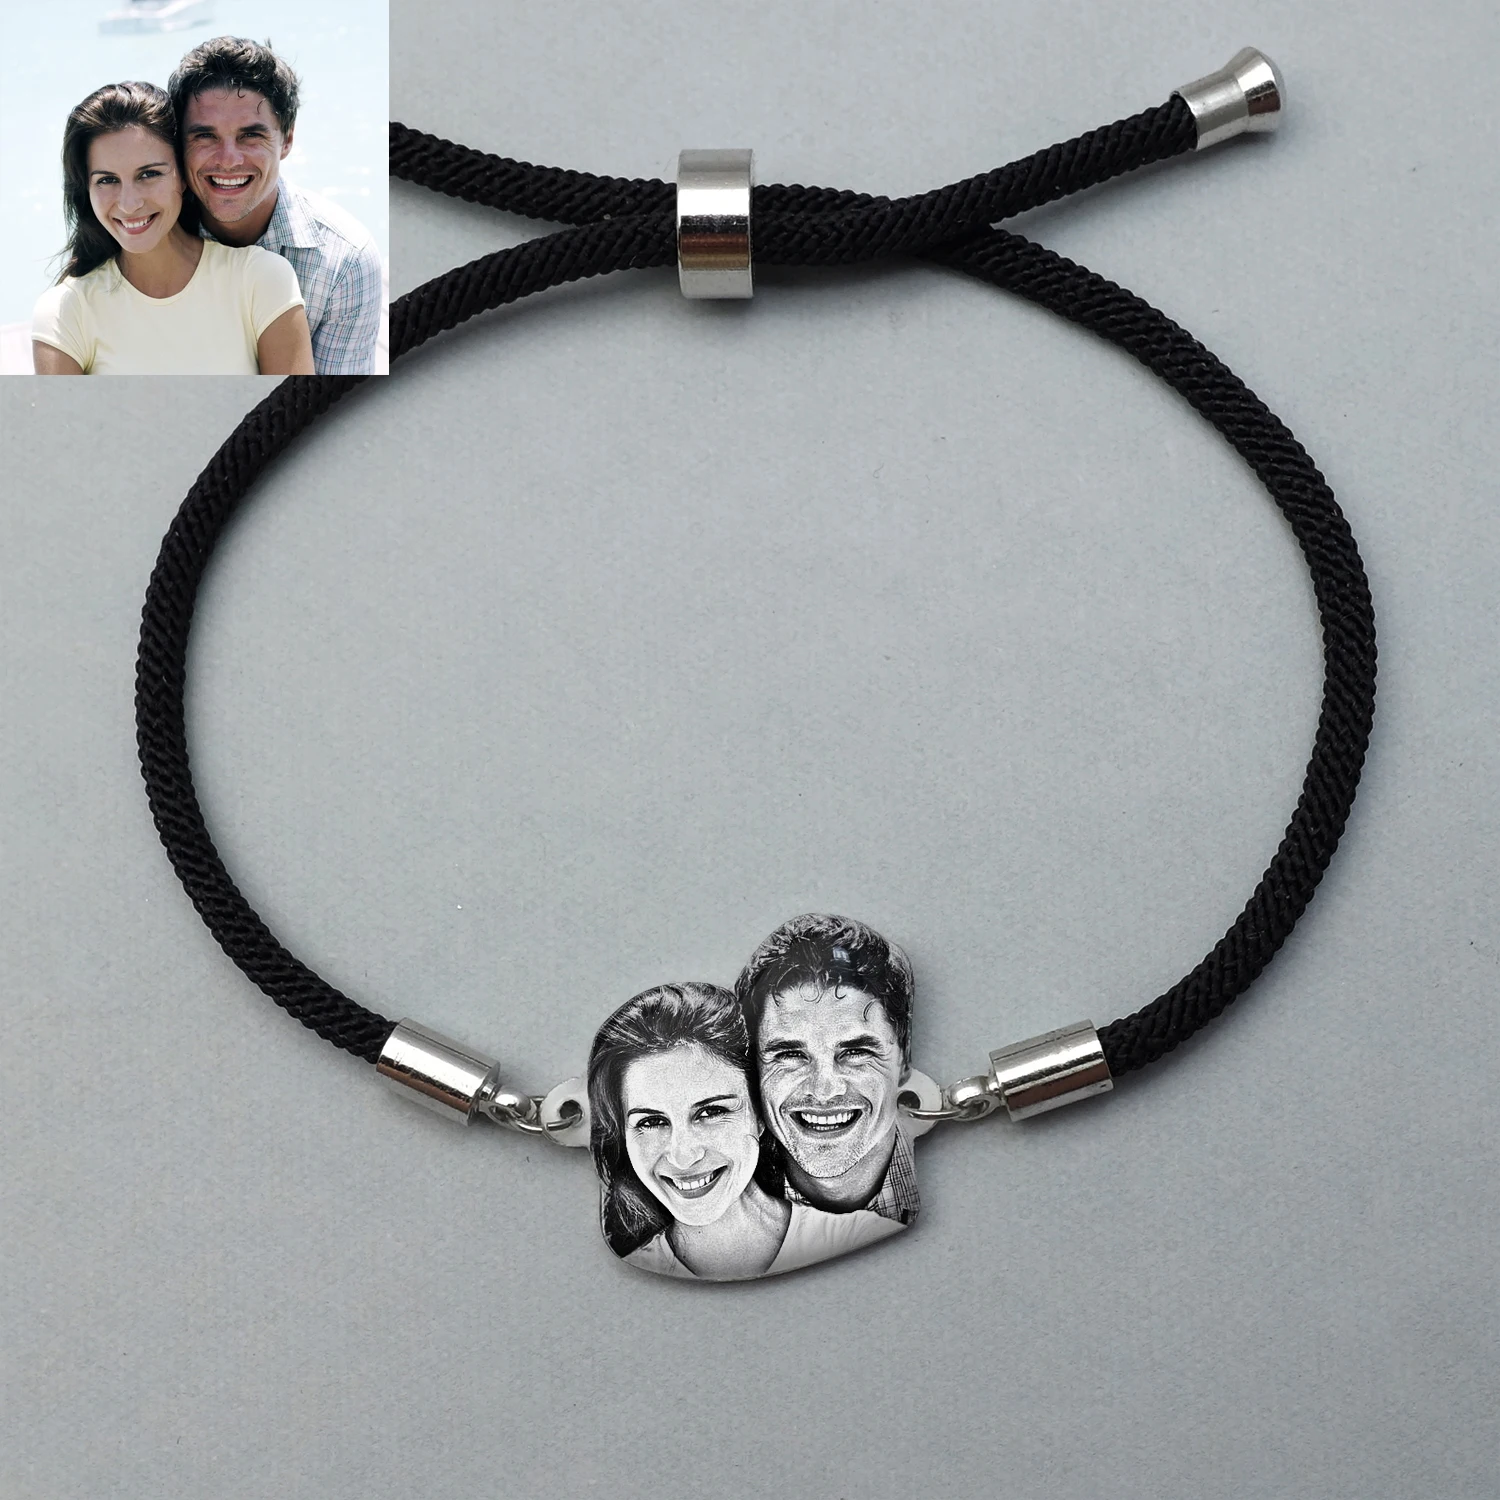 Custom Photo Charm Bracelet Personalized Picture Jewelry Couples Birthday Lover Family Memory Keepsake Christmas Gift for Her personalized photo necklace custom picture necklace engraved photo jewelry family names keepsake gift for mother grandma